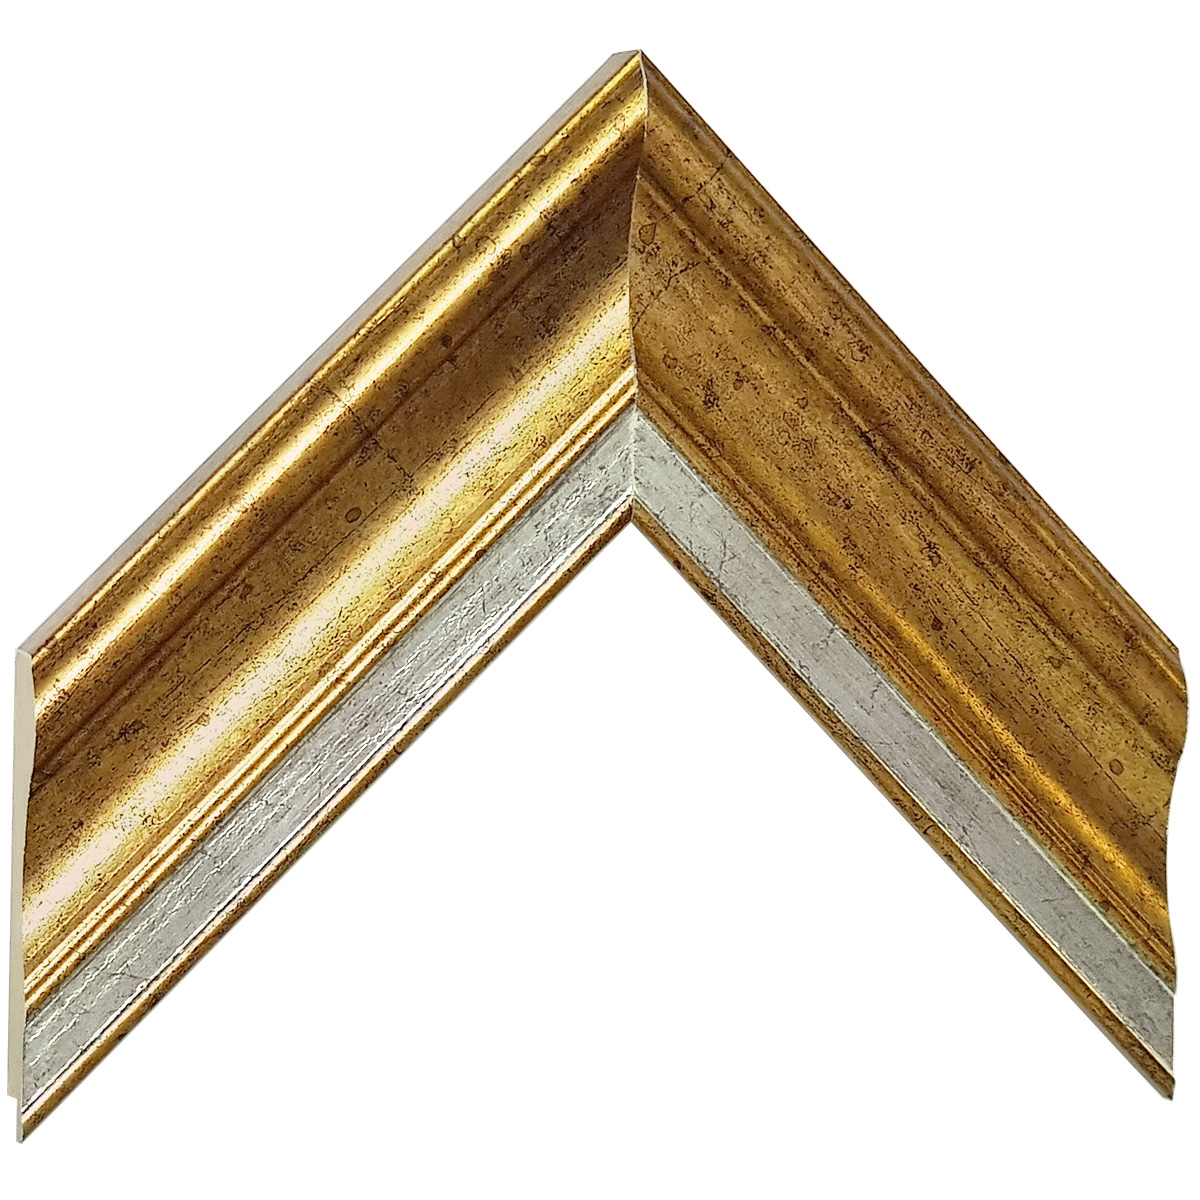 Moulding finger-jointed pine - width 61mm height 20 - Gold, silver edg - Sample